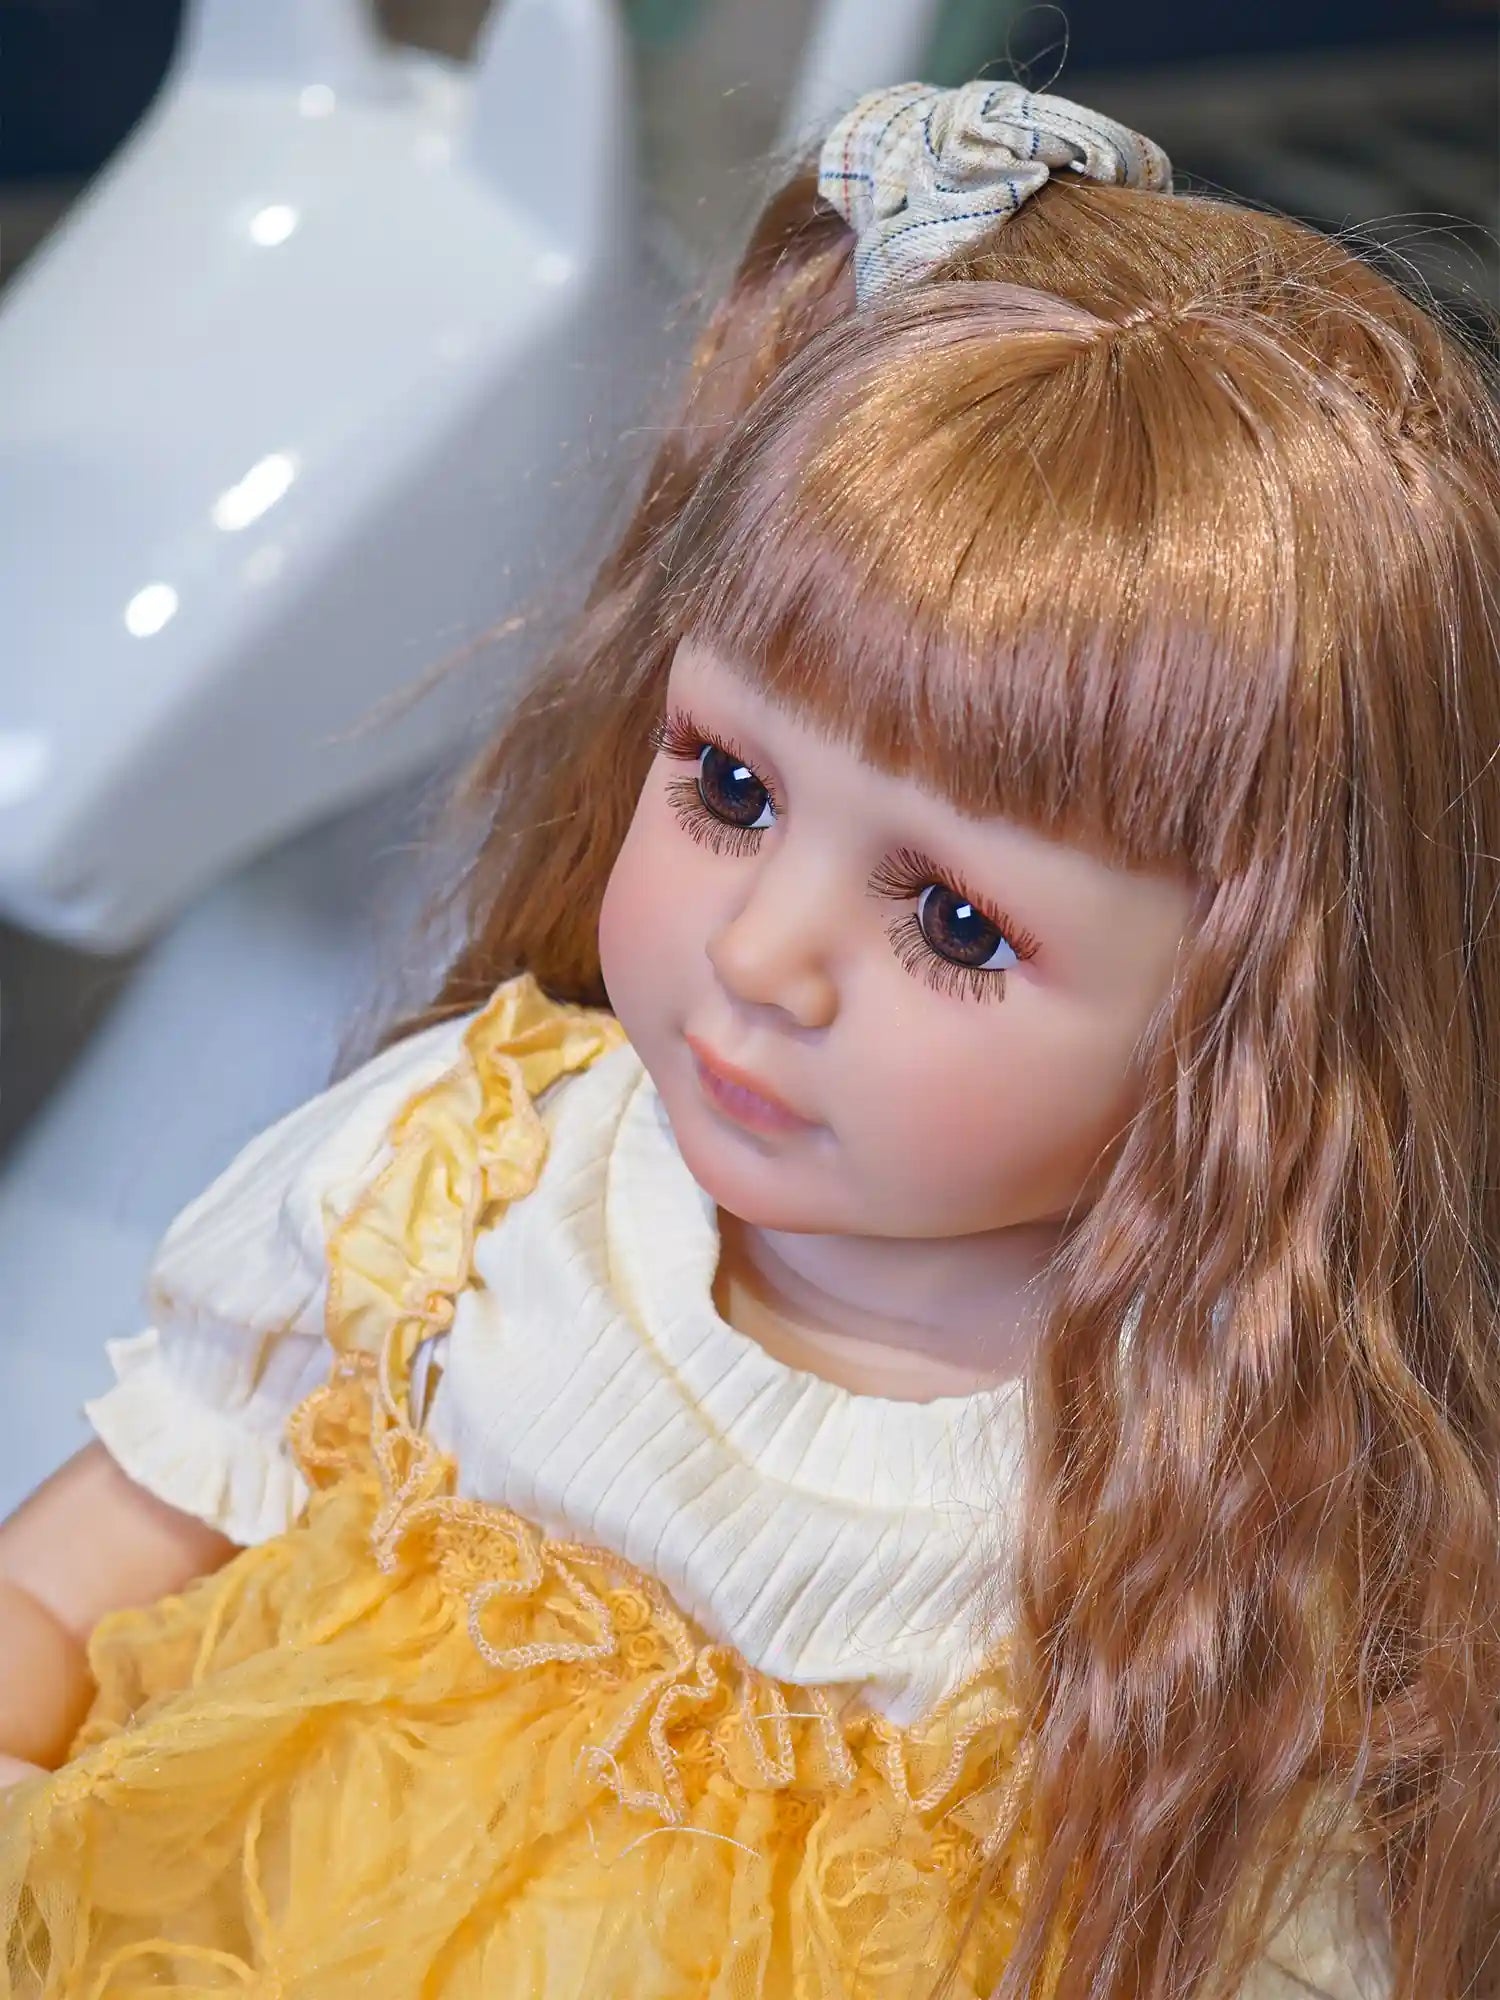 A realistic doll in a vibrant yellow dress, seated on the floor, exuding the innocence of youth with a charming toy car backdrop.